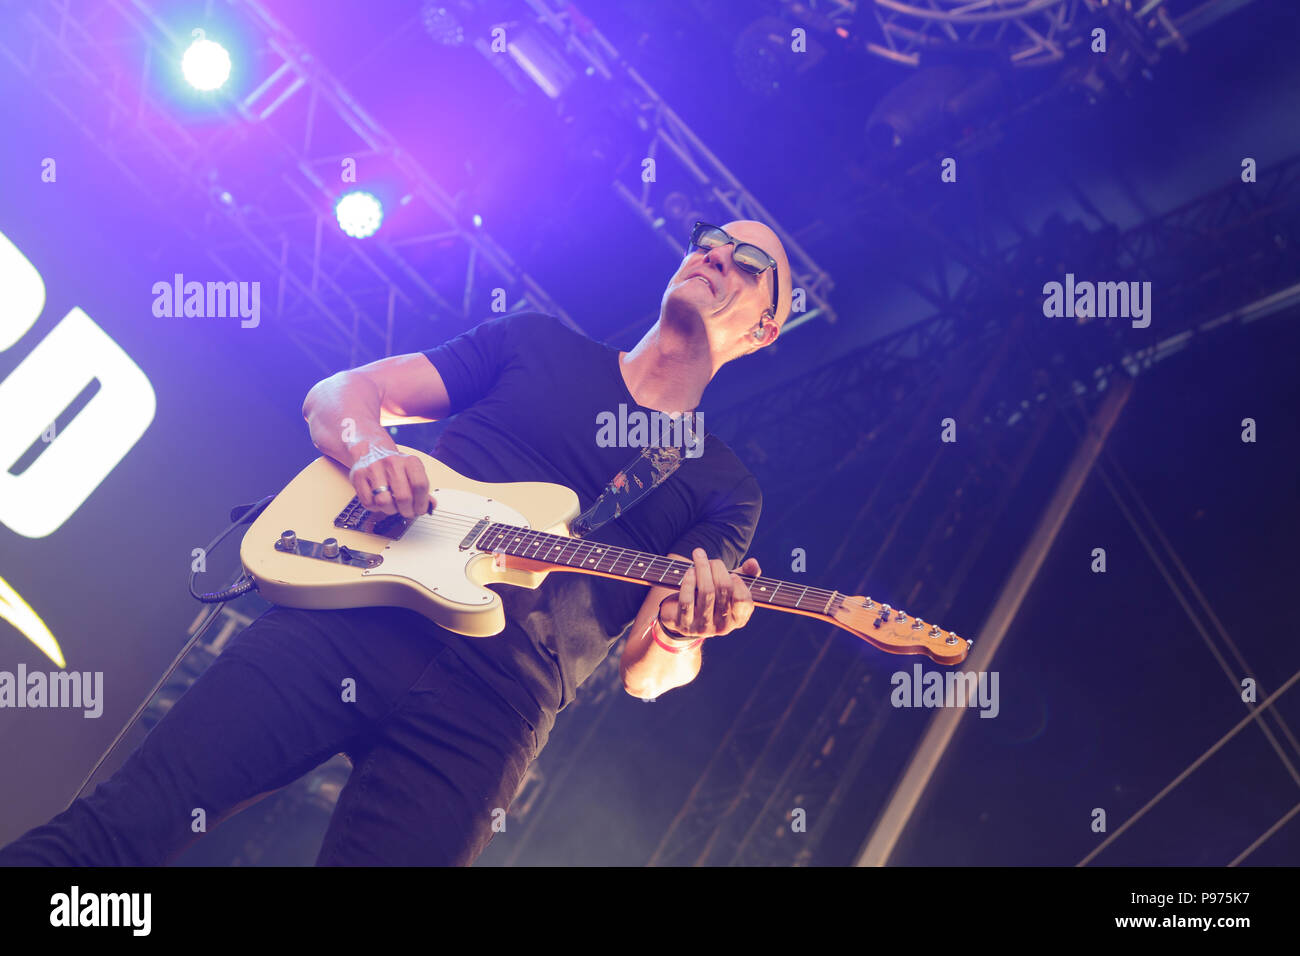 Tours, France. 14 Jul 2018. Ryan Davidson the lead guitarist of multi award winning Canadian Country superstar Gord Bamford’s band at the annual American Tours Festival, Tours, France. Credit: Julian Elliott/Alamy Live News Stock Photo